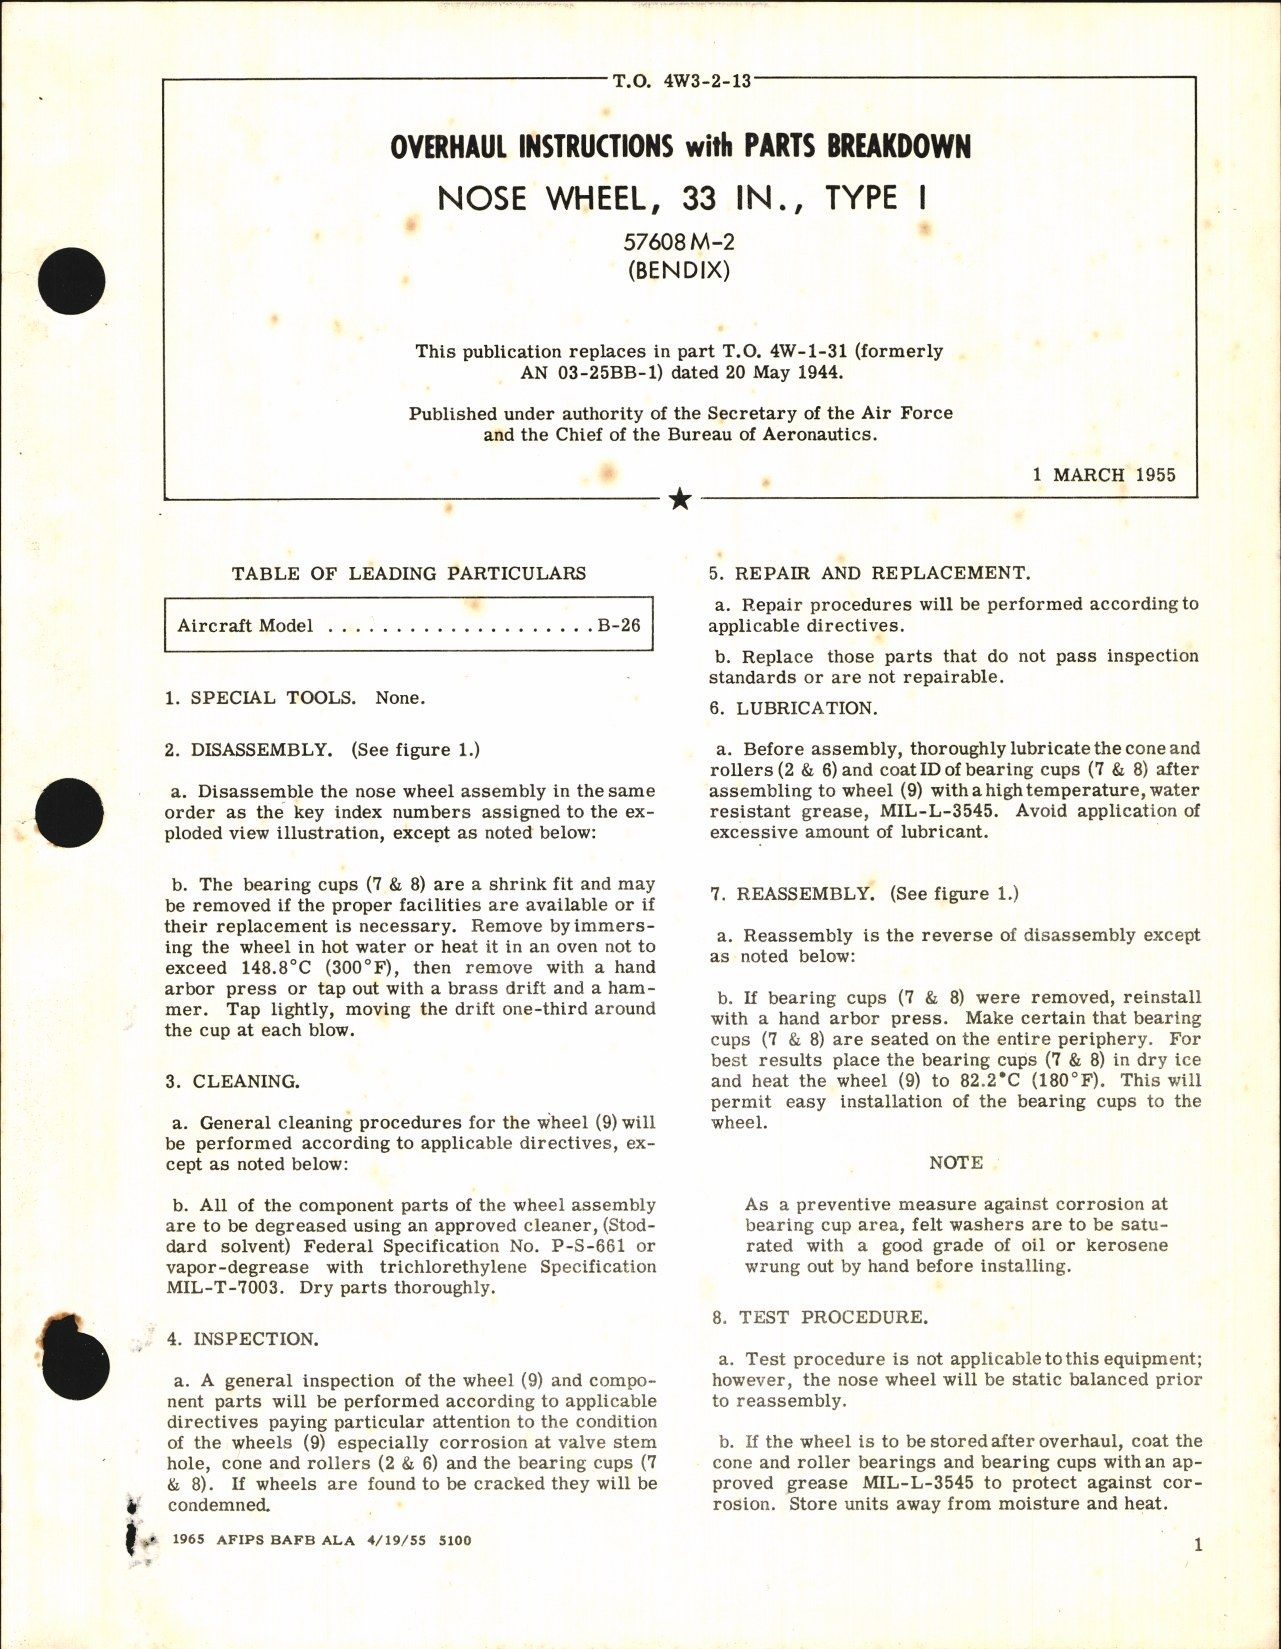 Sample page 1 from AirCorps Library document: Overhaul Instructions with Parts Breakdown for Nose Wheel 33 In., Type I